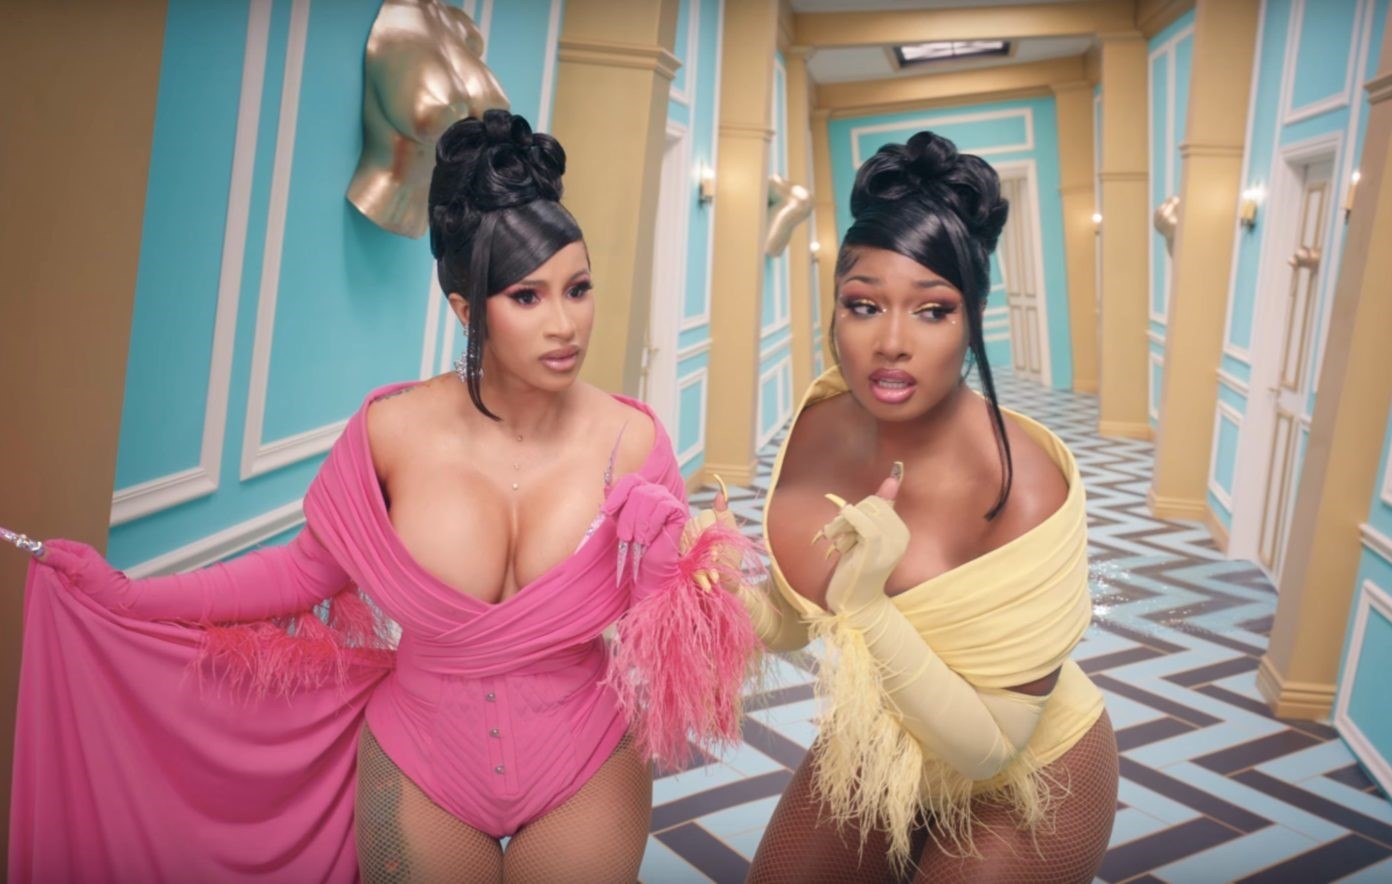 Kylie Jenner Cameos in Cardi B and Megan Thee Stallion's 'WAP